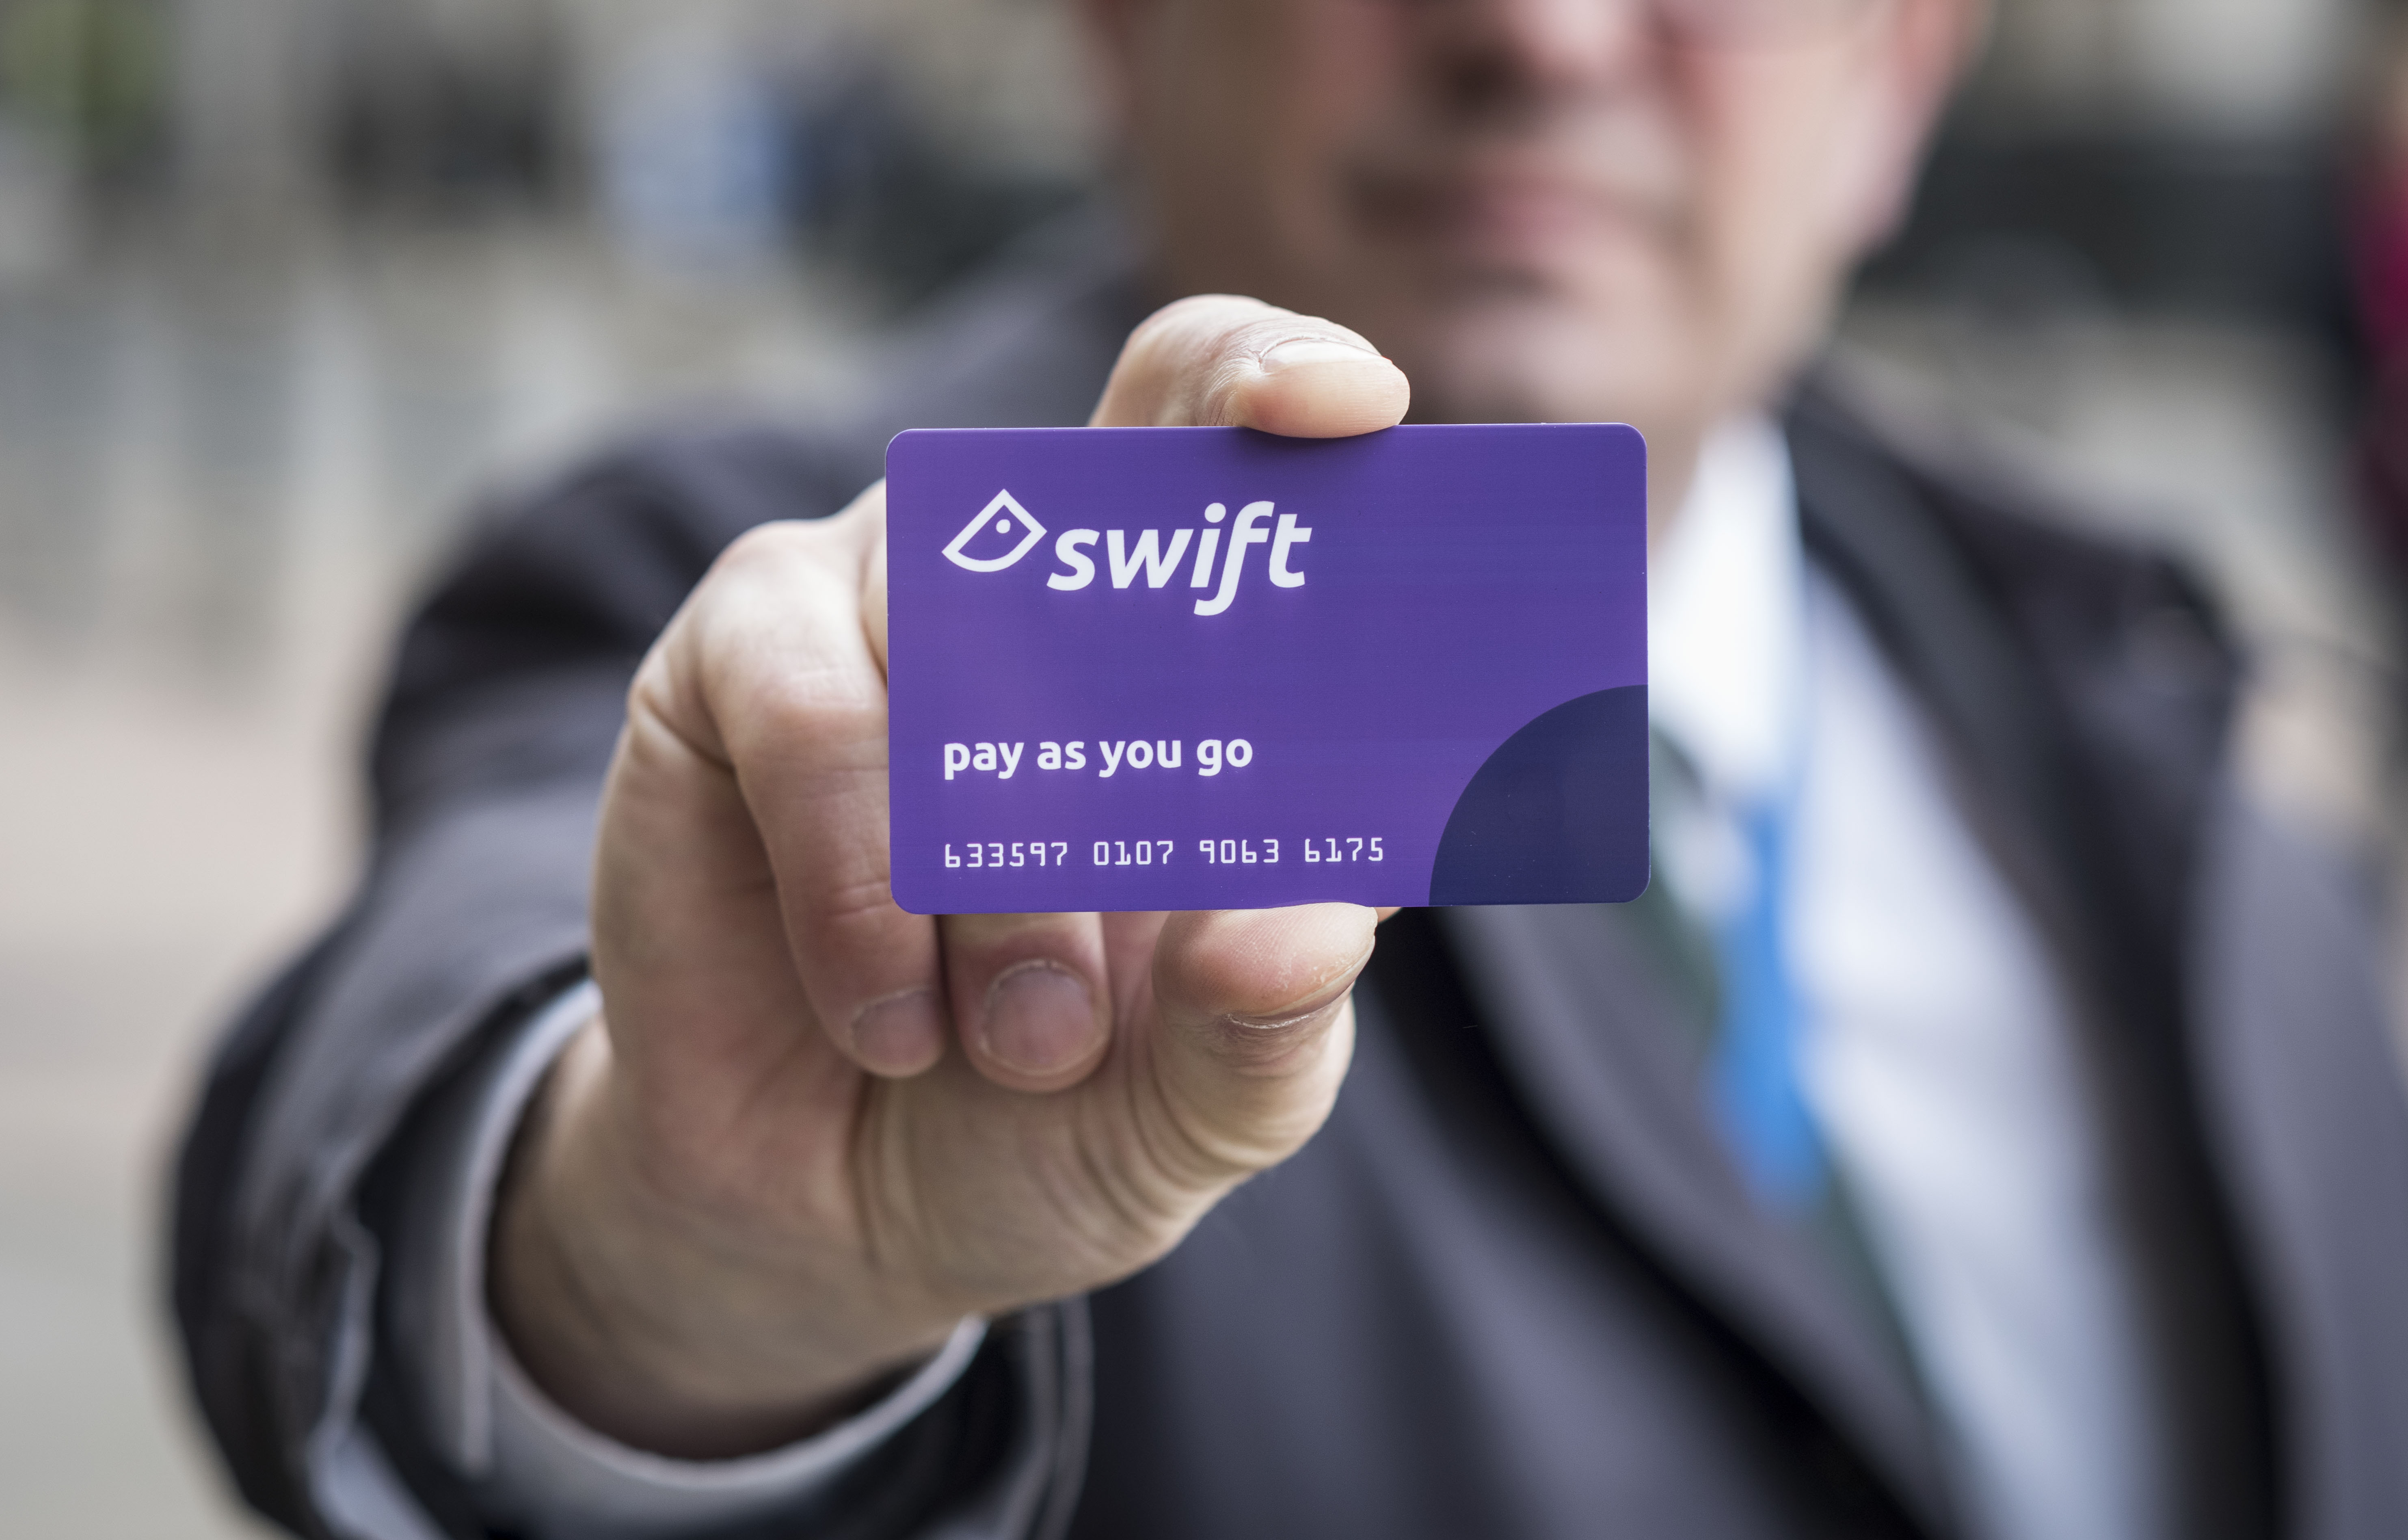 Swift card used for more than 50 million journeys